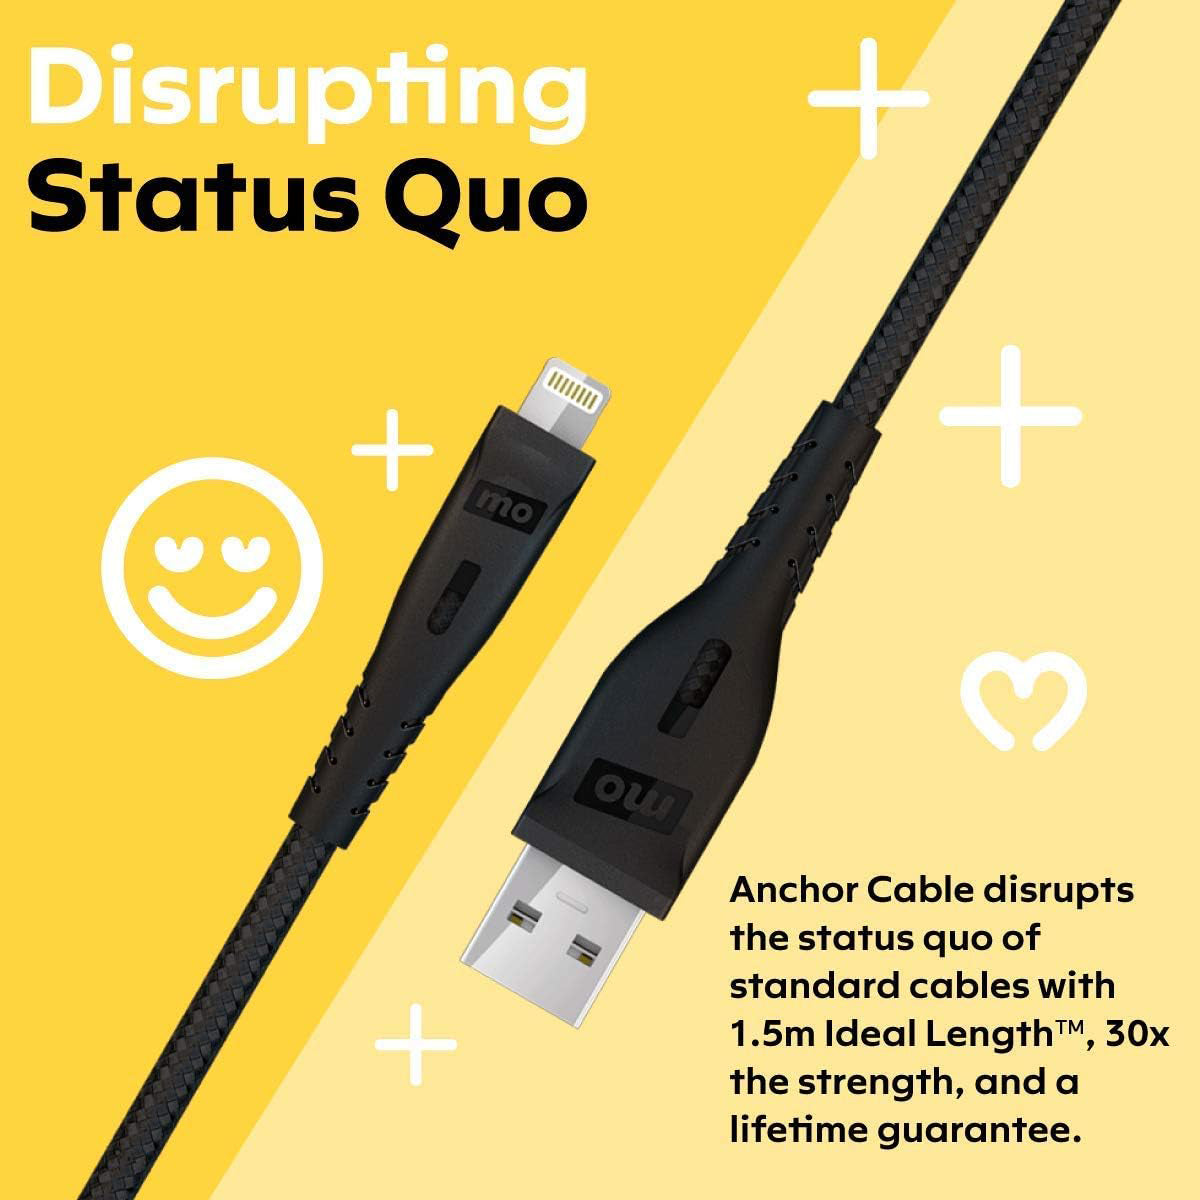 Anchor Apple MFi Certified USB Lightning Cable - Cable Lightning USB con certificación Anchor Apple MFi